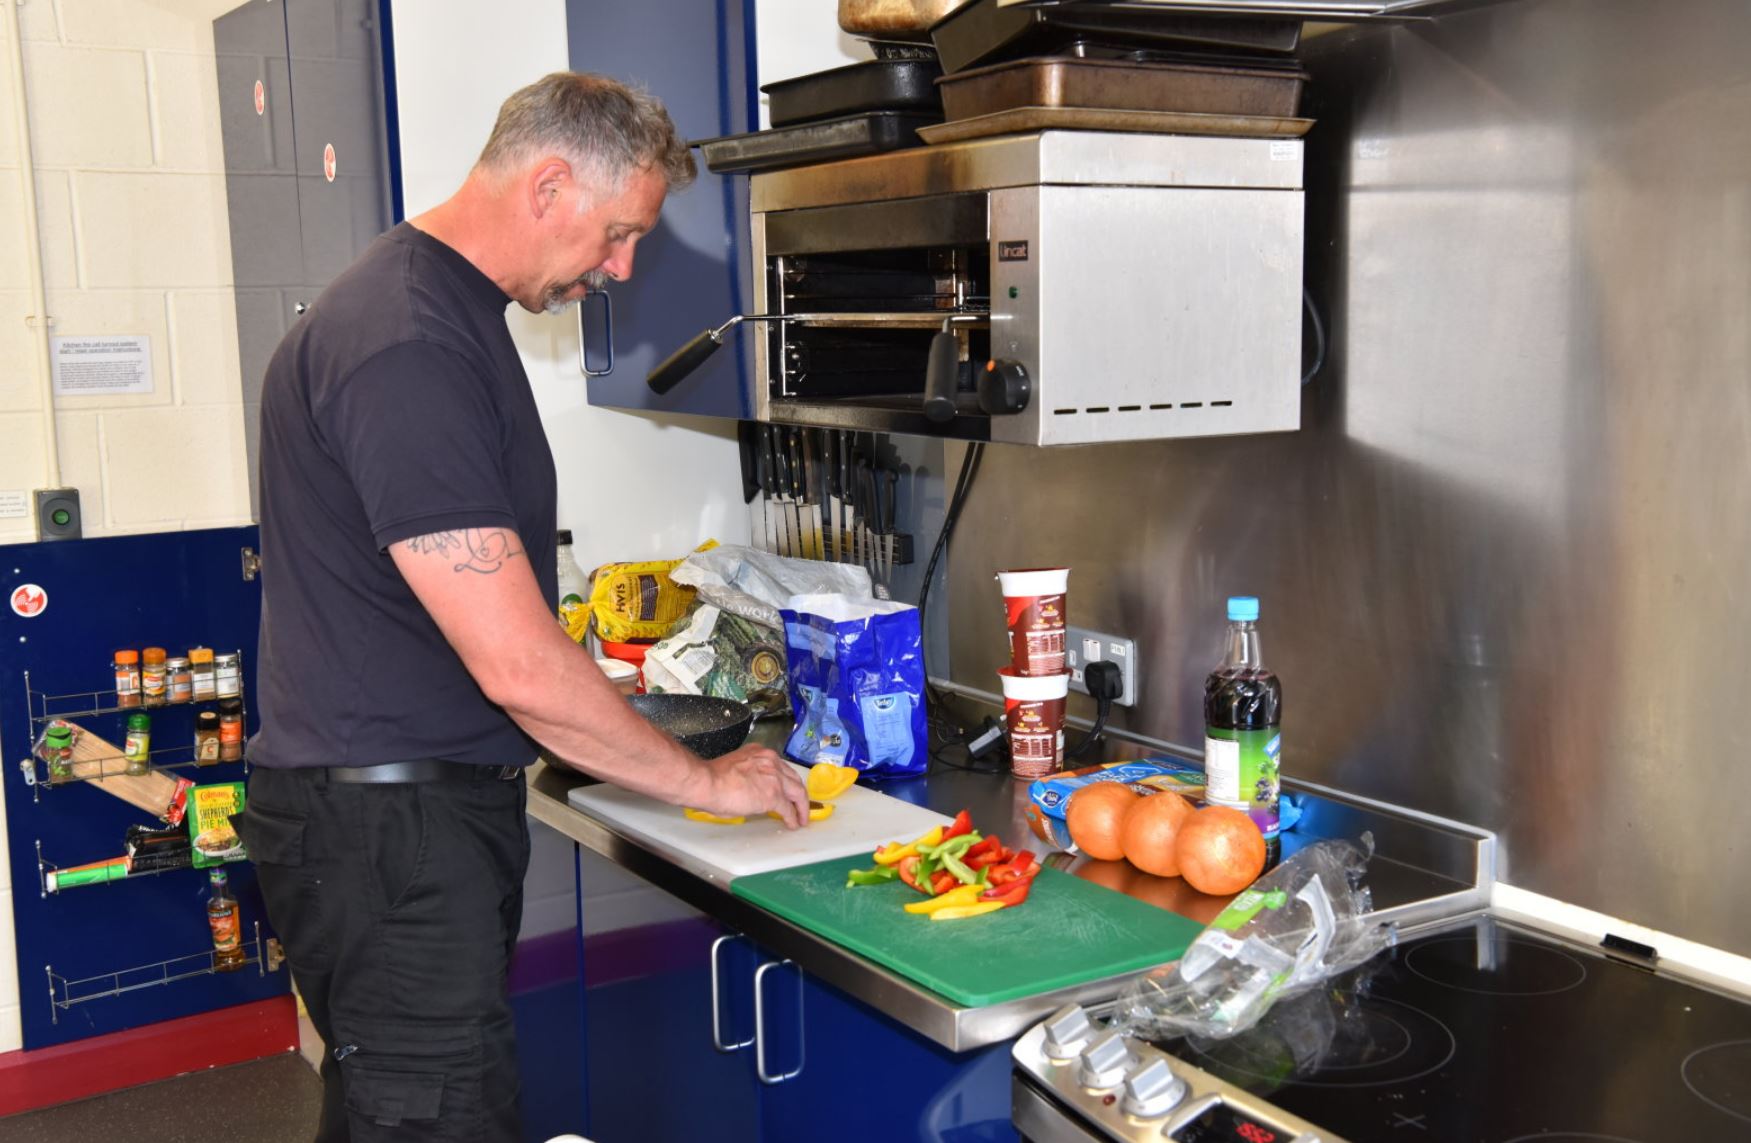 Firefighter in the kitchen preparing a meal.